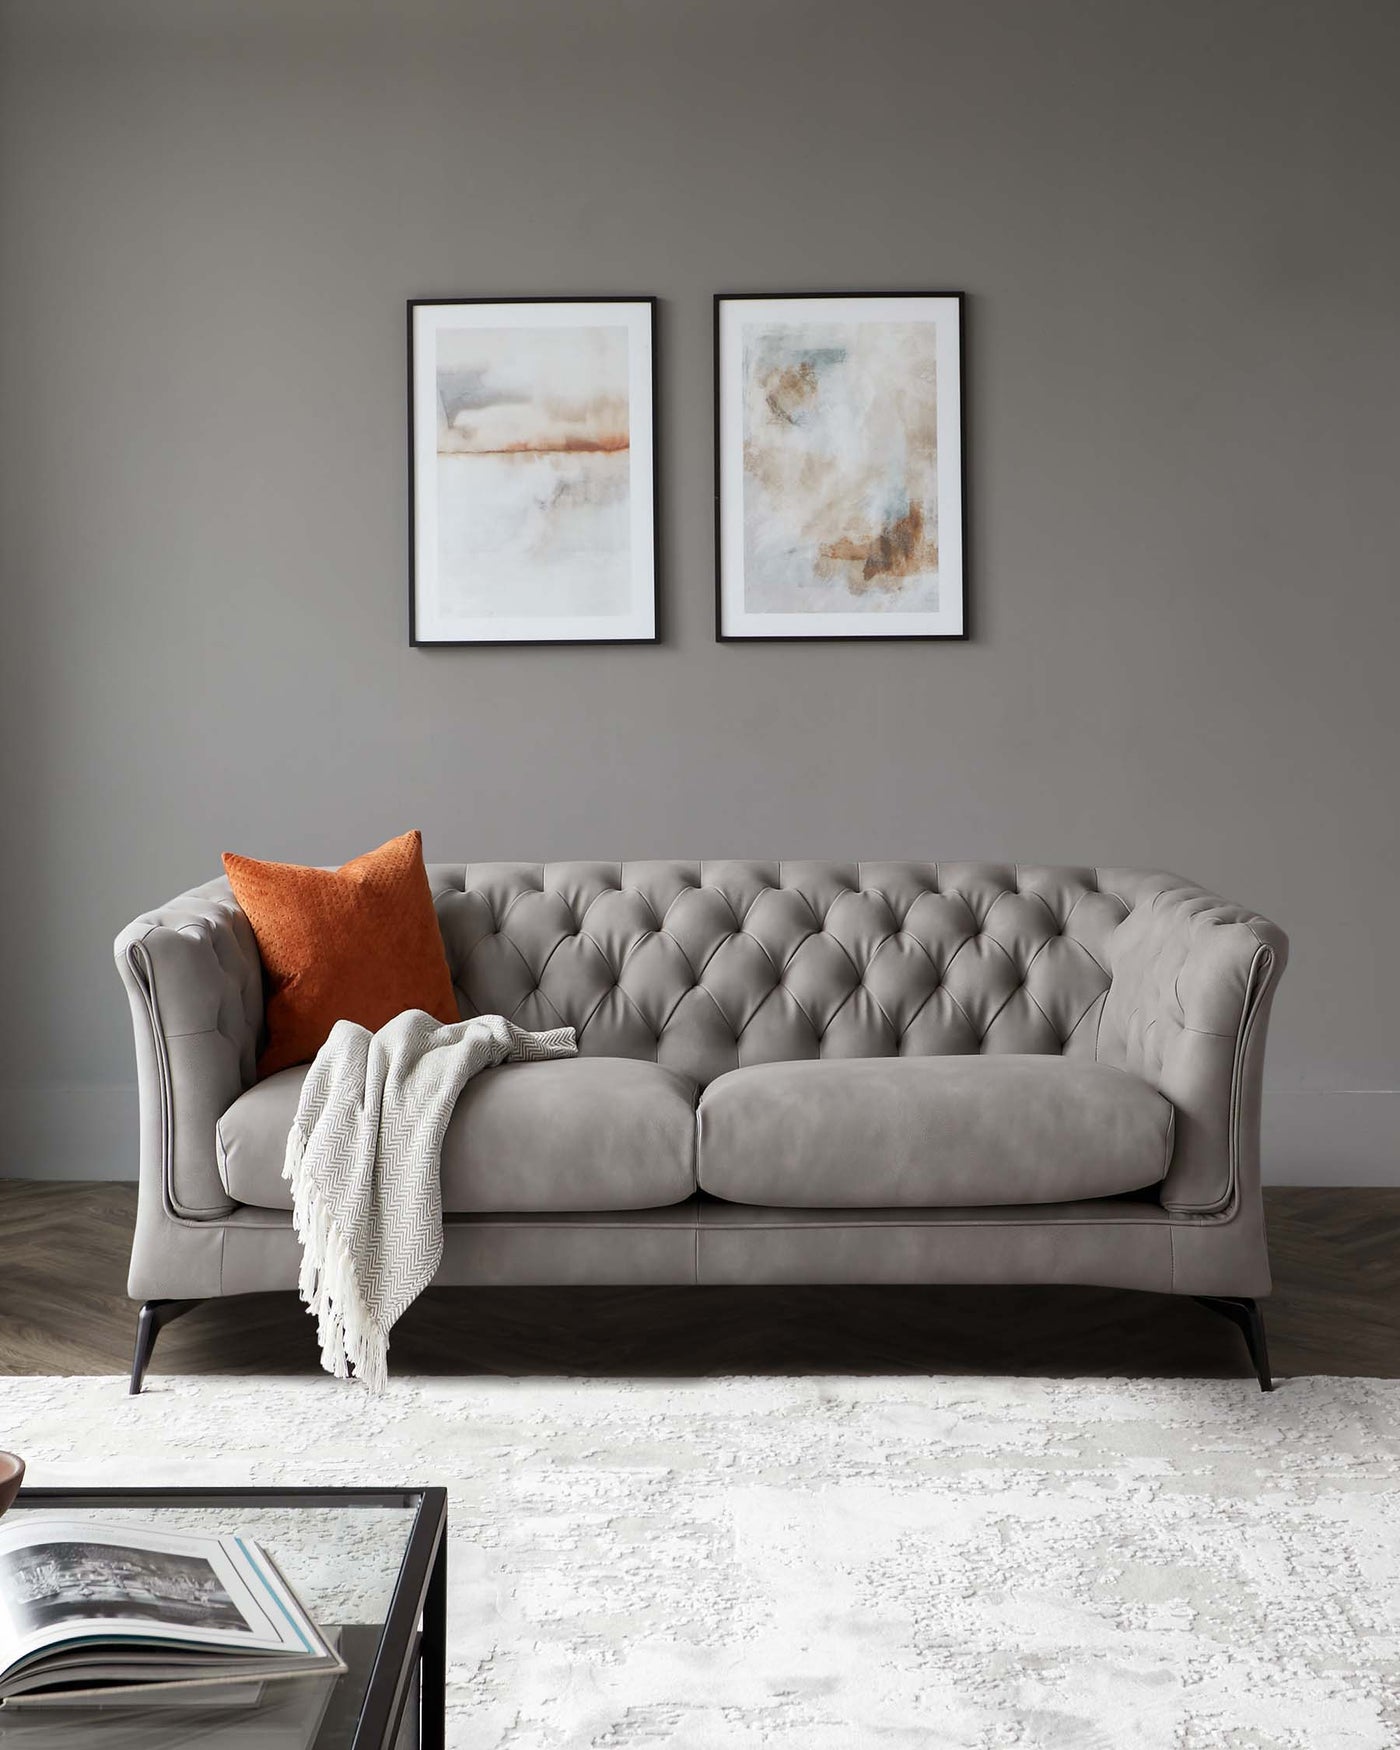 Elegant grey tufted sofa with rolled arms and dark wooden legs, accented with an orange decorative pillow and a white throw blanket.